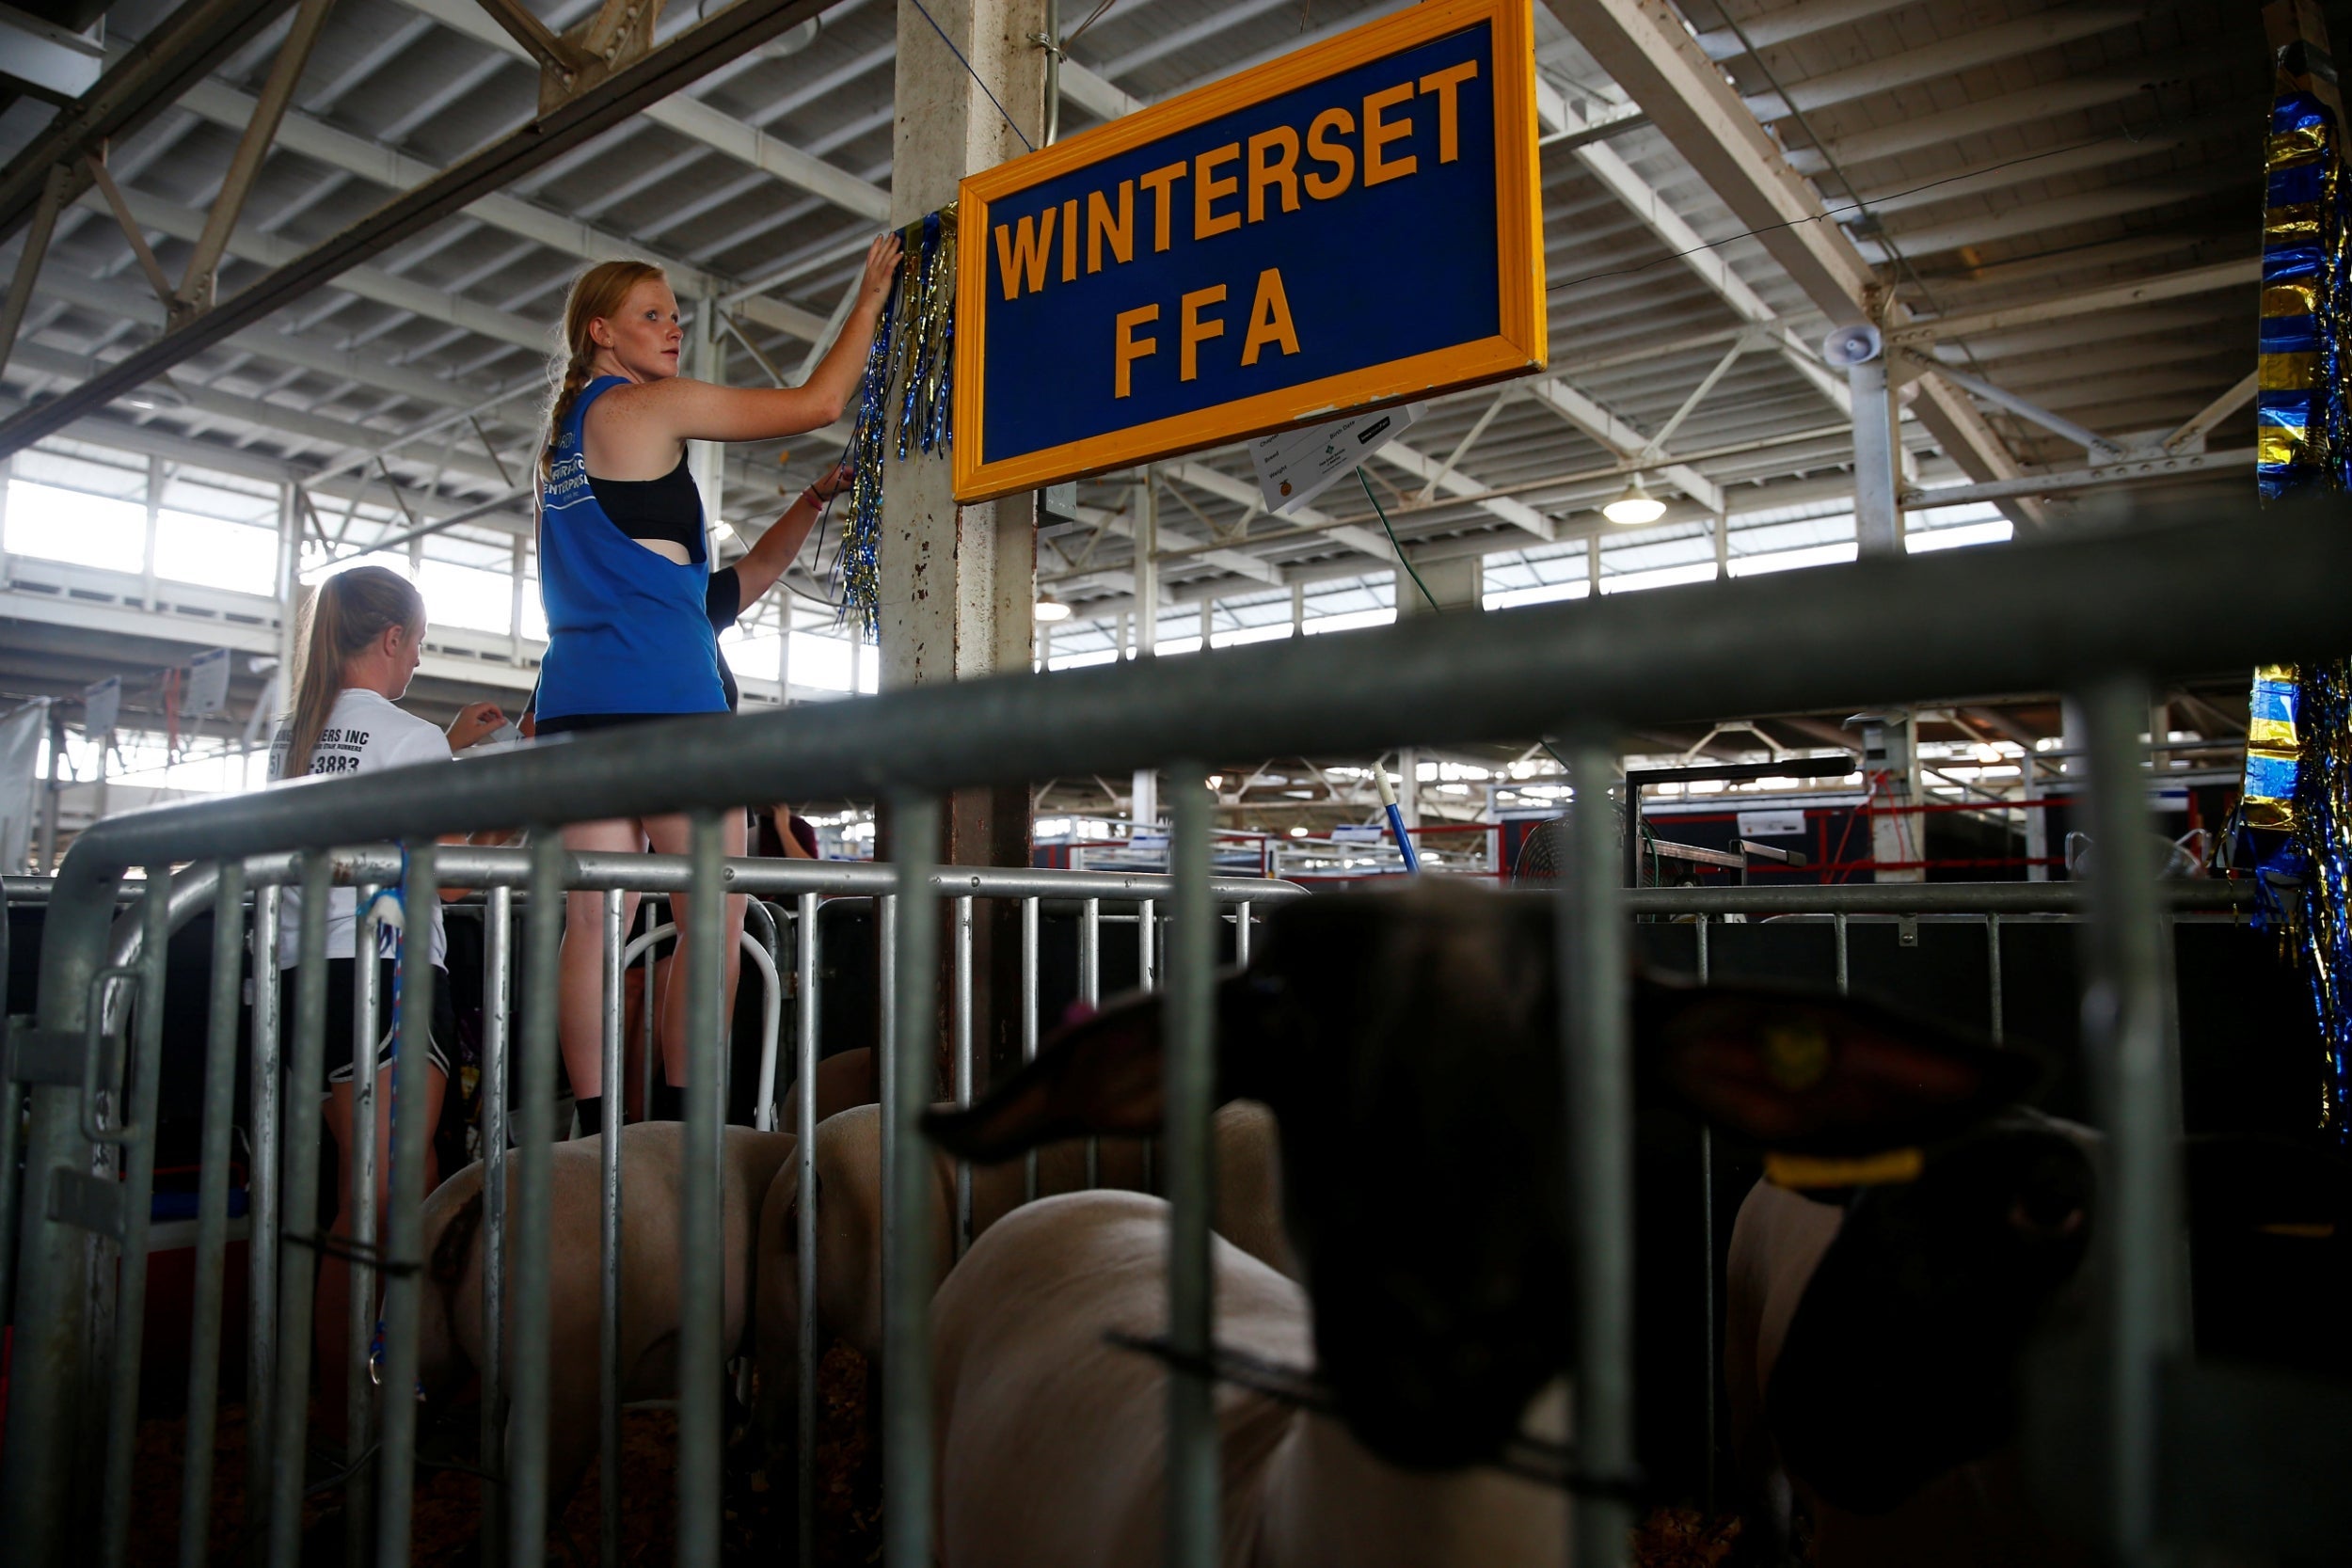 Preparations for the Iowa State Fair in Des Moines. The agricultural show’s ability to attract top politicians every year is testament to the power of the farming industry in the US